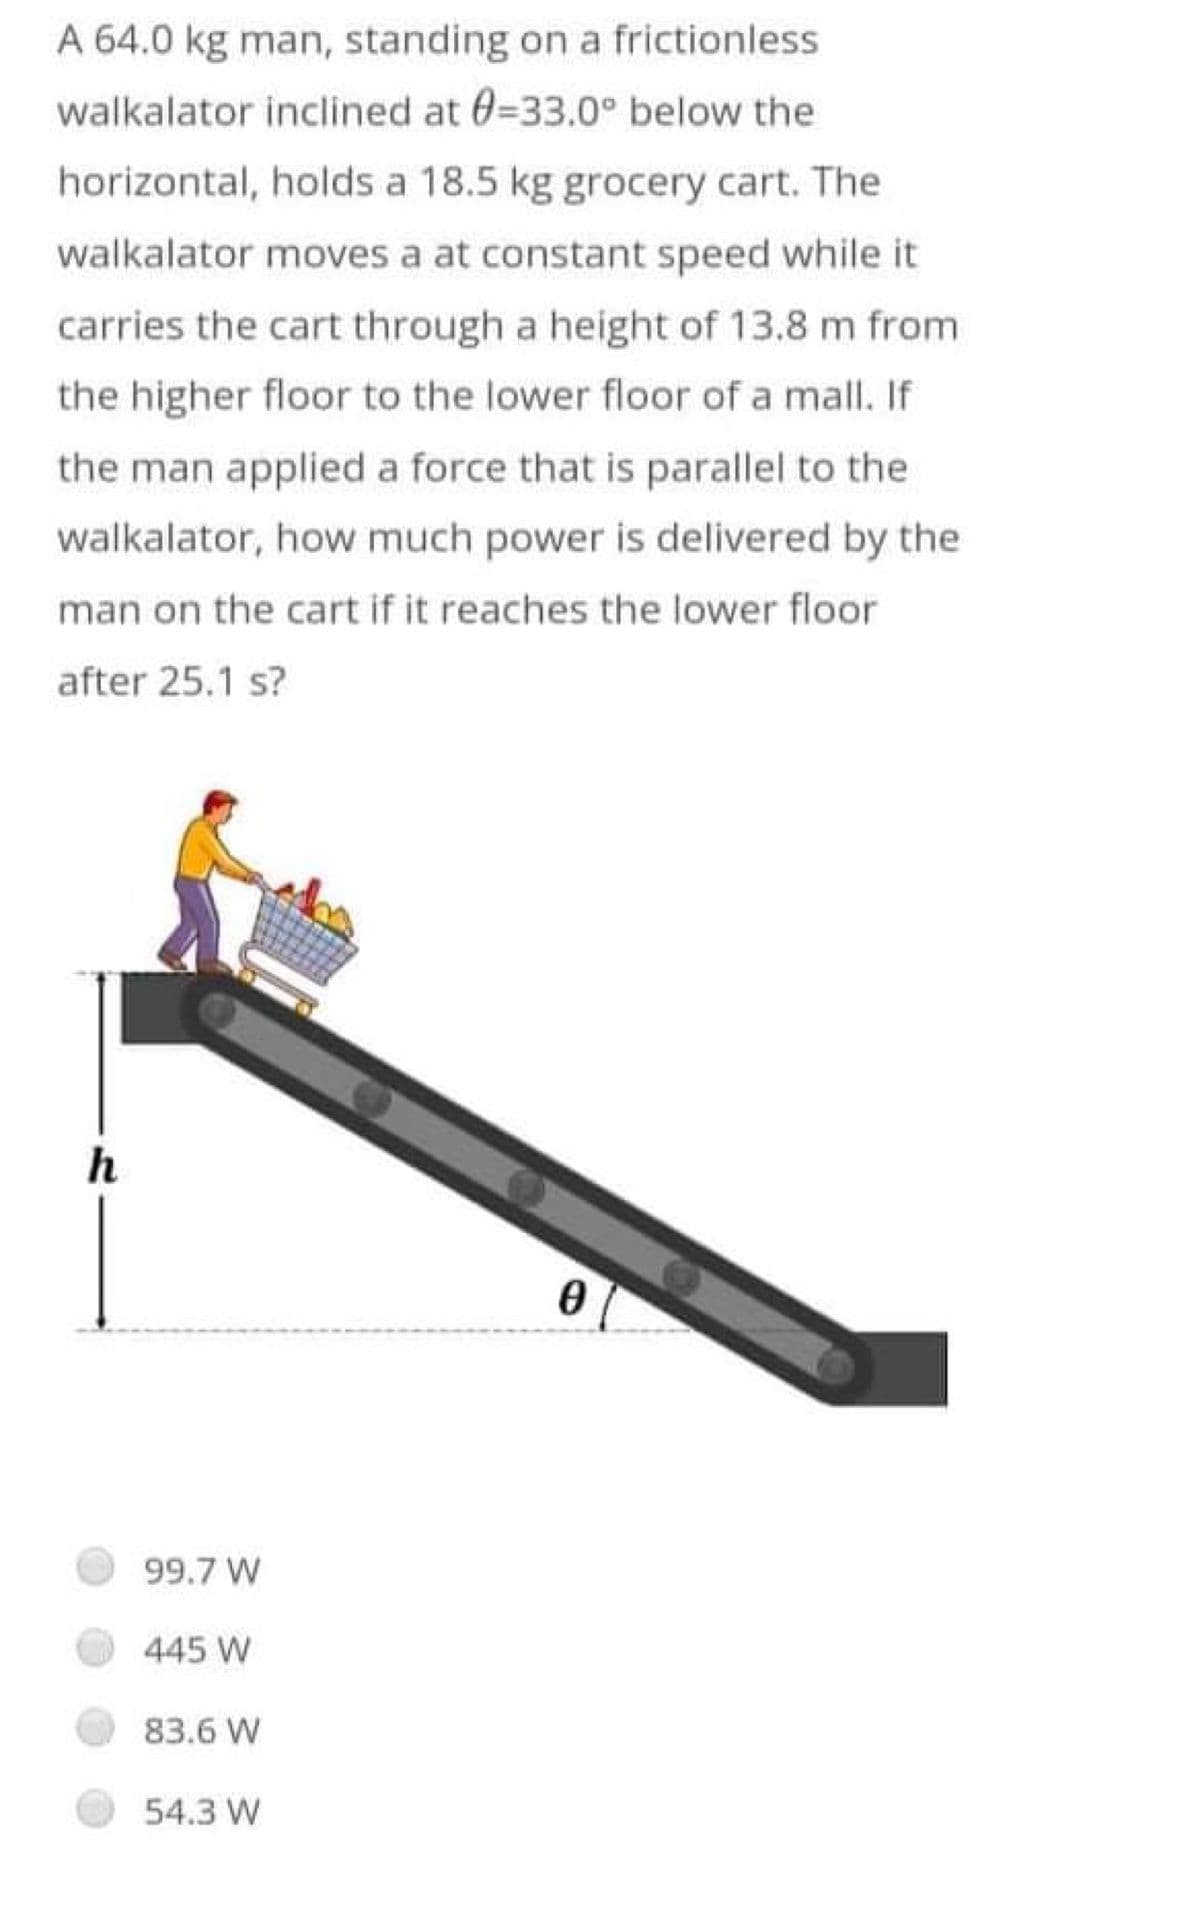 A 64.0 kg man, standing on a frictionless
walkalator inclined at 0=33.0° below the
horizontal, holds a 18.5 kg grocery cart. The
walkalator moves a at constant speed while it
carries the cart through a height of 13.8 m from
the higher floor to the lower floor of a mall. If
the man applied a force that is parallel to the
walkalator, how much power is delivered by the
man on the cart if it reaches the lower floor
after 25.1 s?
h
0
99.7 W
445 W
83.6 W
54.3 W